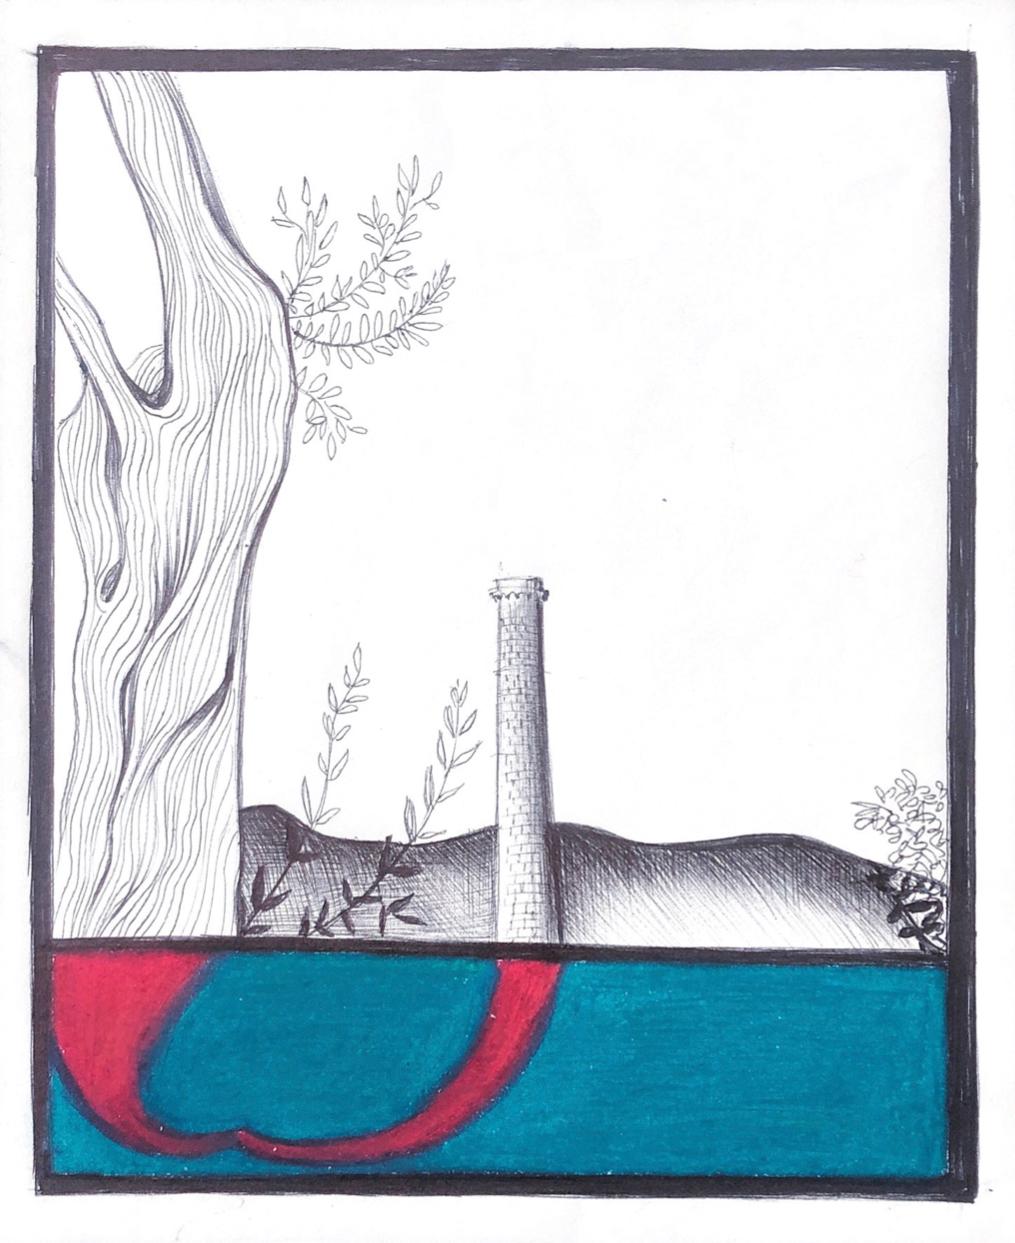 Caterina Arciprete Landscape Art - History of Paxos Island, mixed media on paper, blue and red